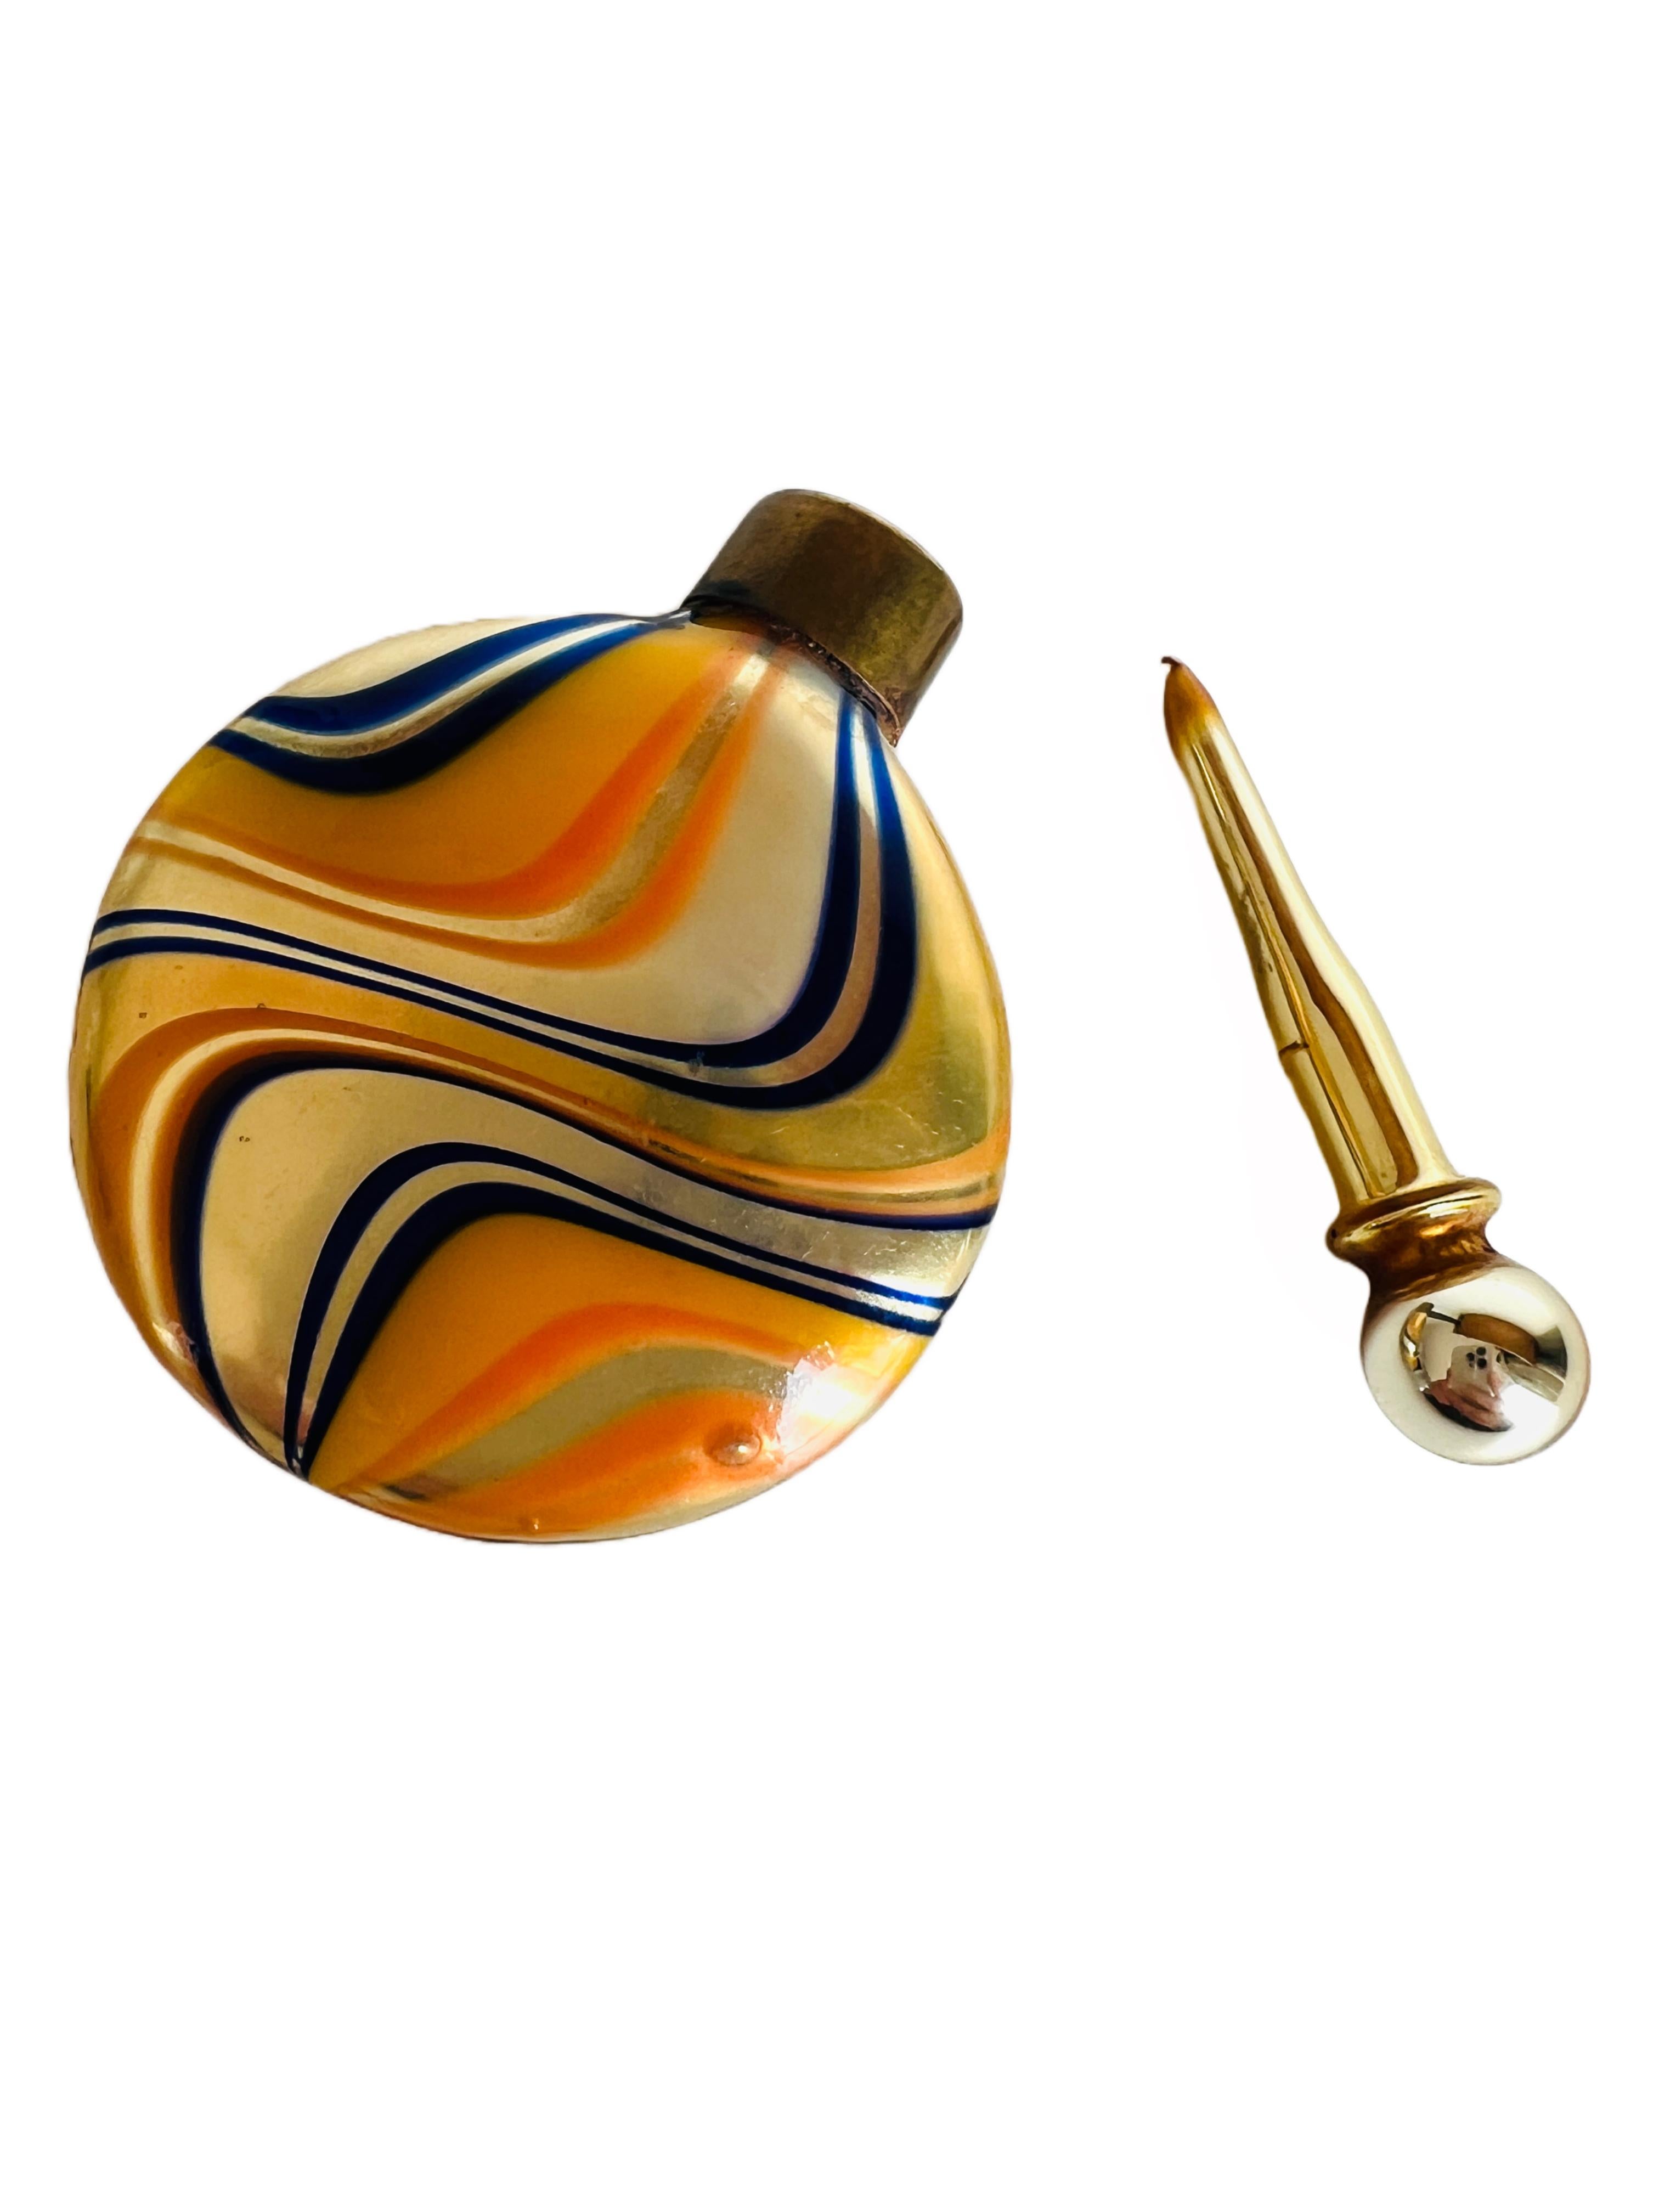 Lovely orange and blue swirled mercury blown glass perfume bottle with delicate dauber.

Size:  2-1/8